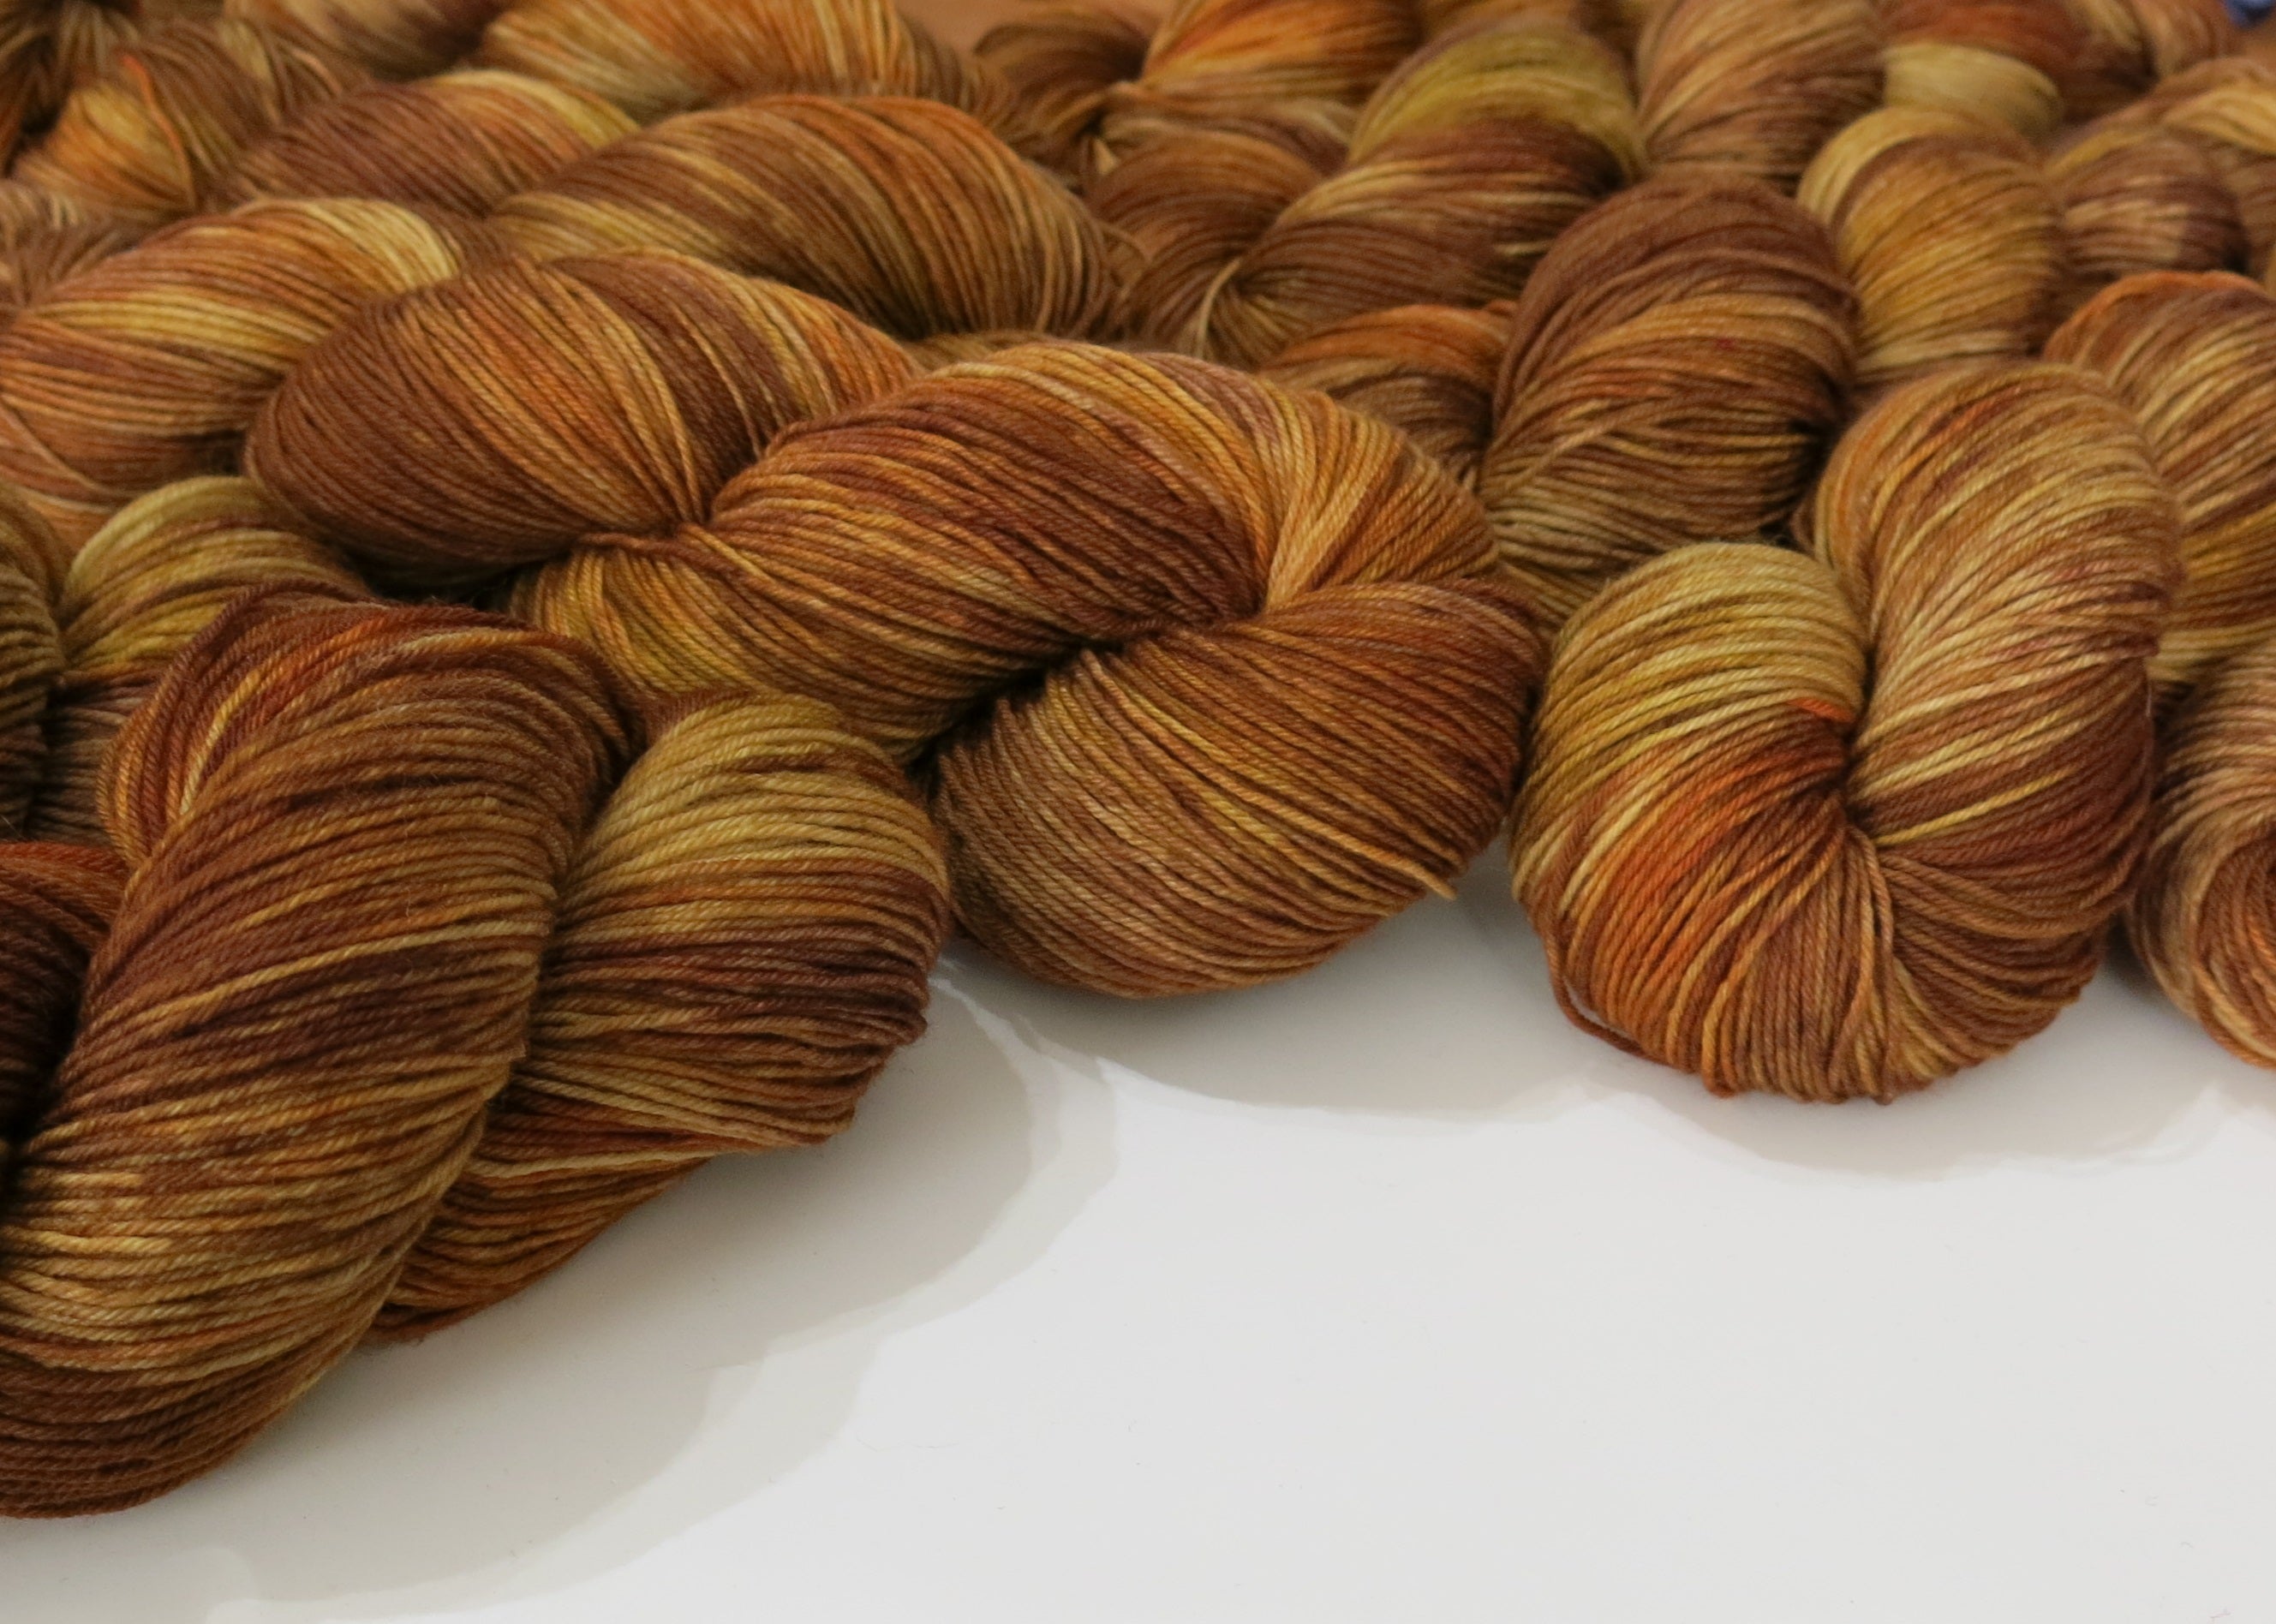 indie dyed yarn in reds, browns and yellows insoired by scottish willow back creels